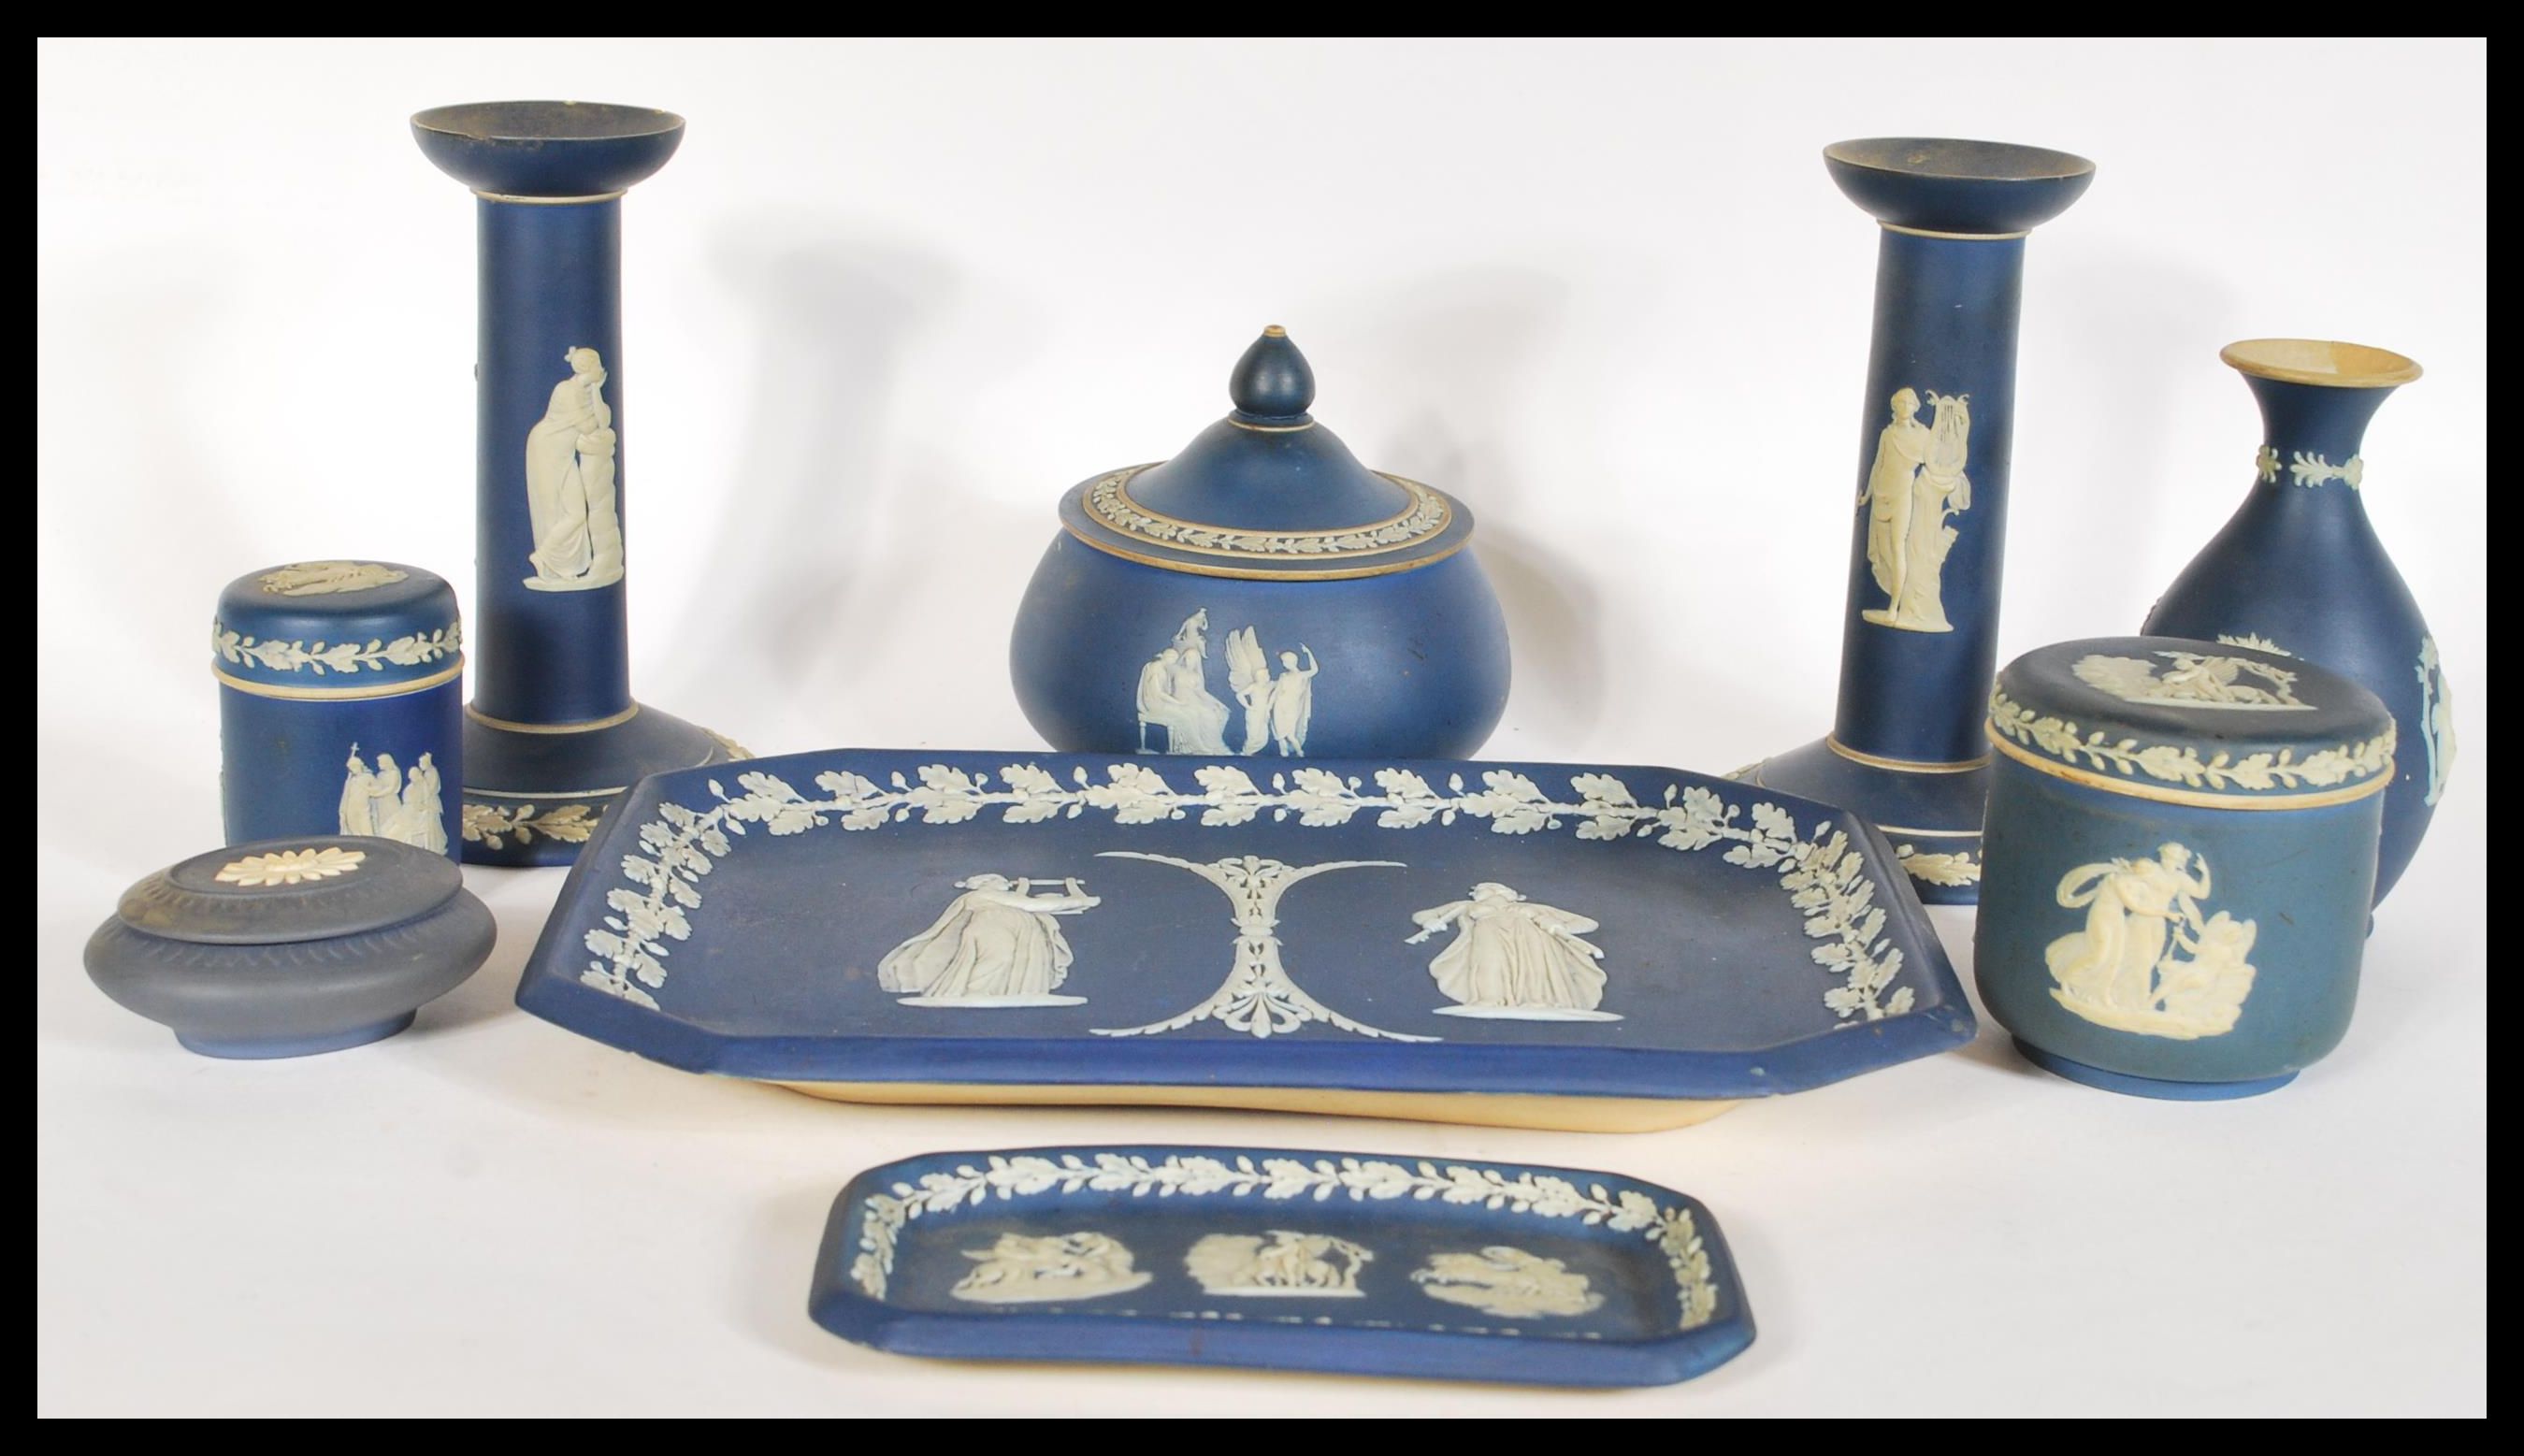 A collection of Wedgwood jasperware items dating f